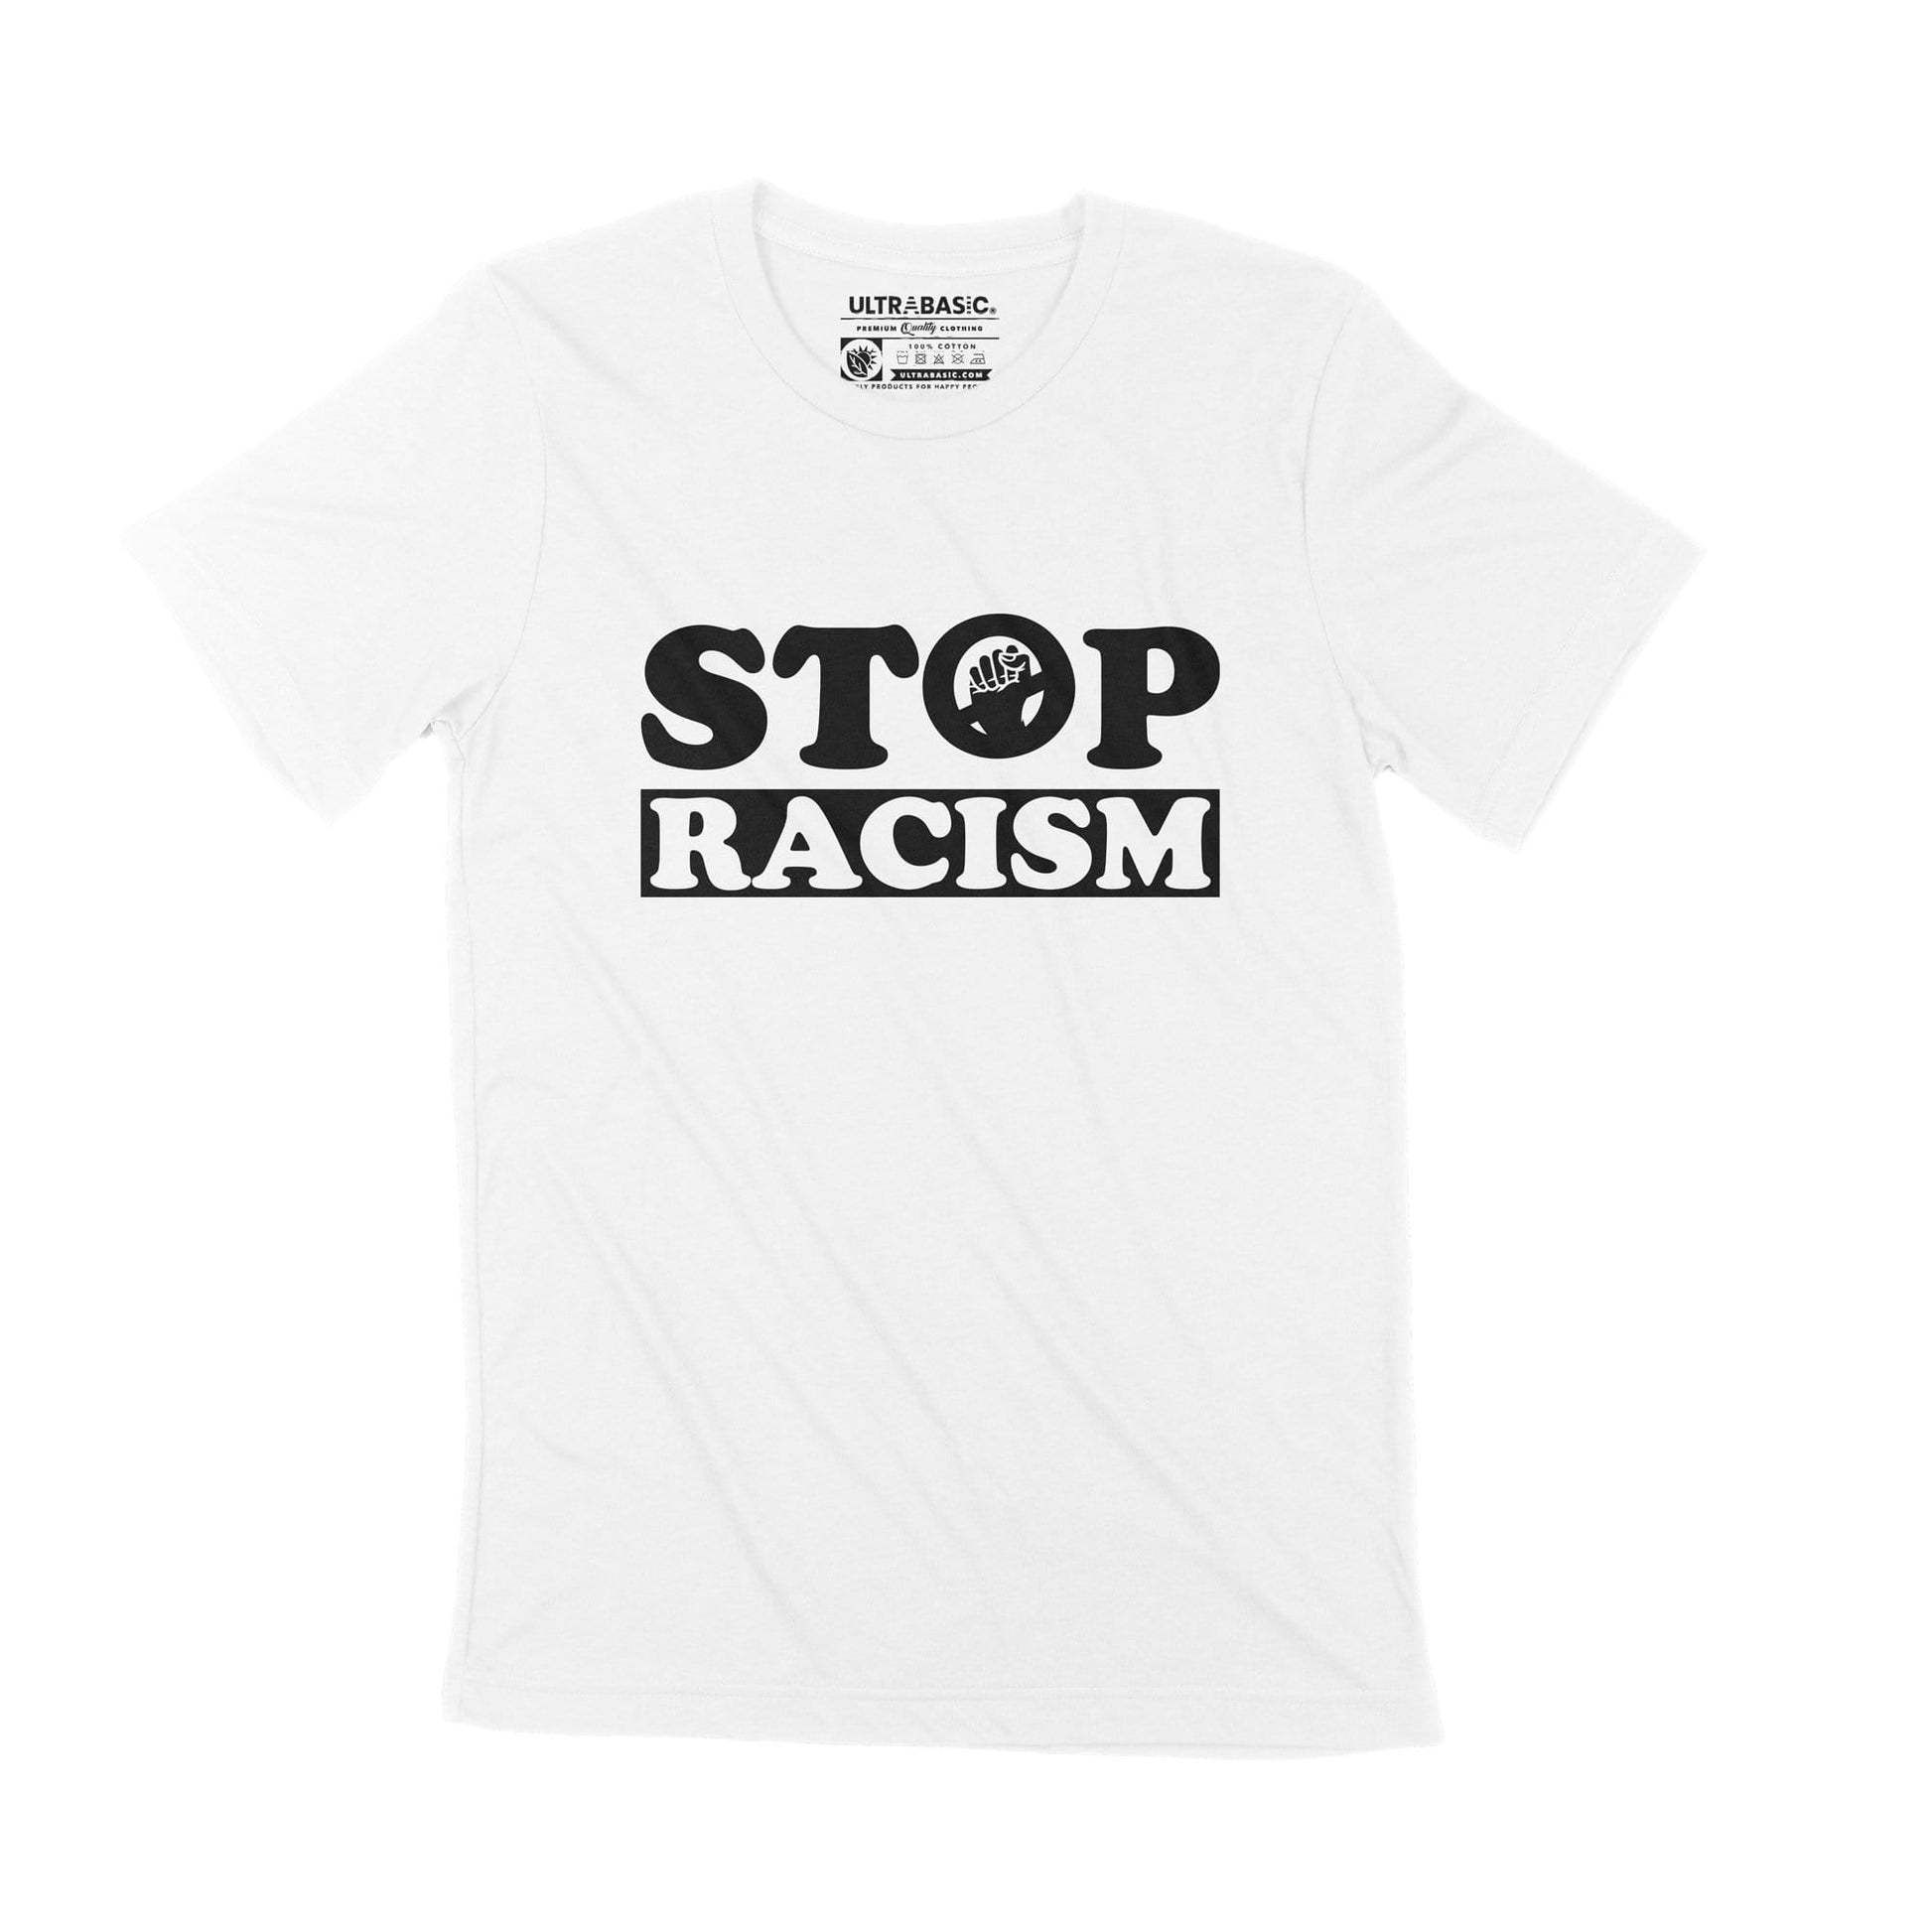 racist justice peace resistance police brutality equality anti-trump apparel campaign trump power king outfit all lives matter outfits african american pride 2020 men clothes women youth authentic history inspiring culture democrate obama plain blm